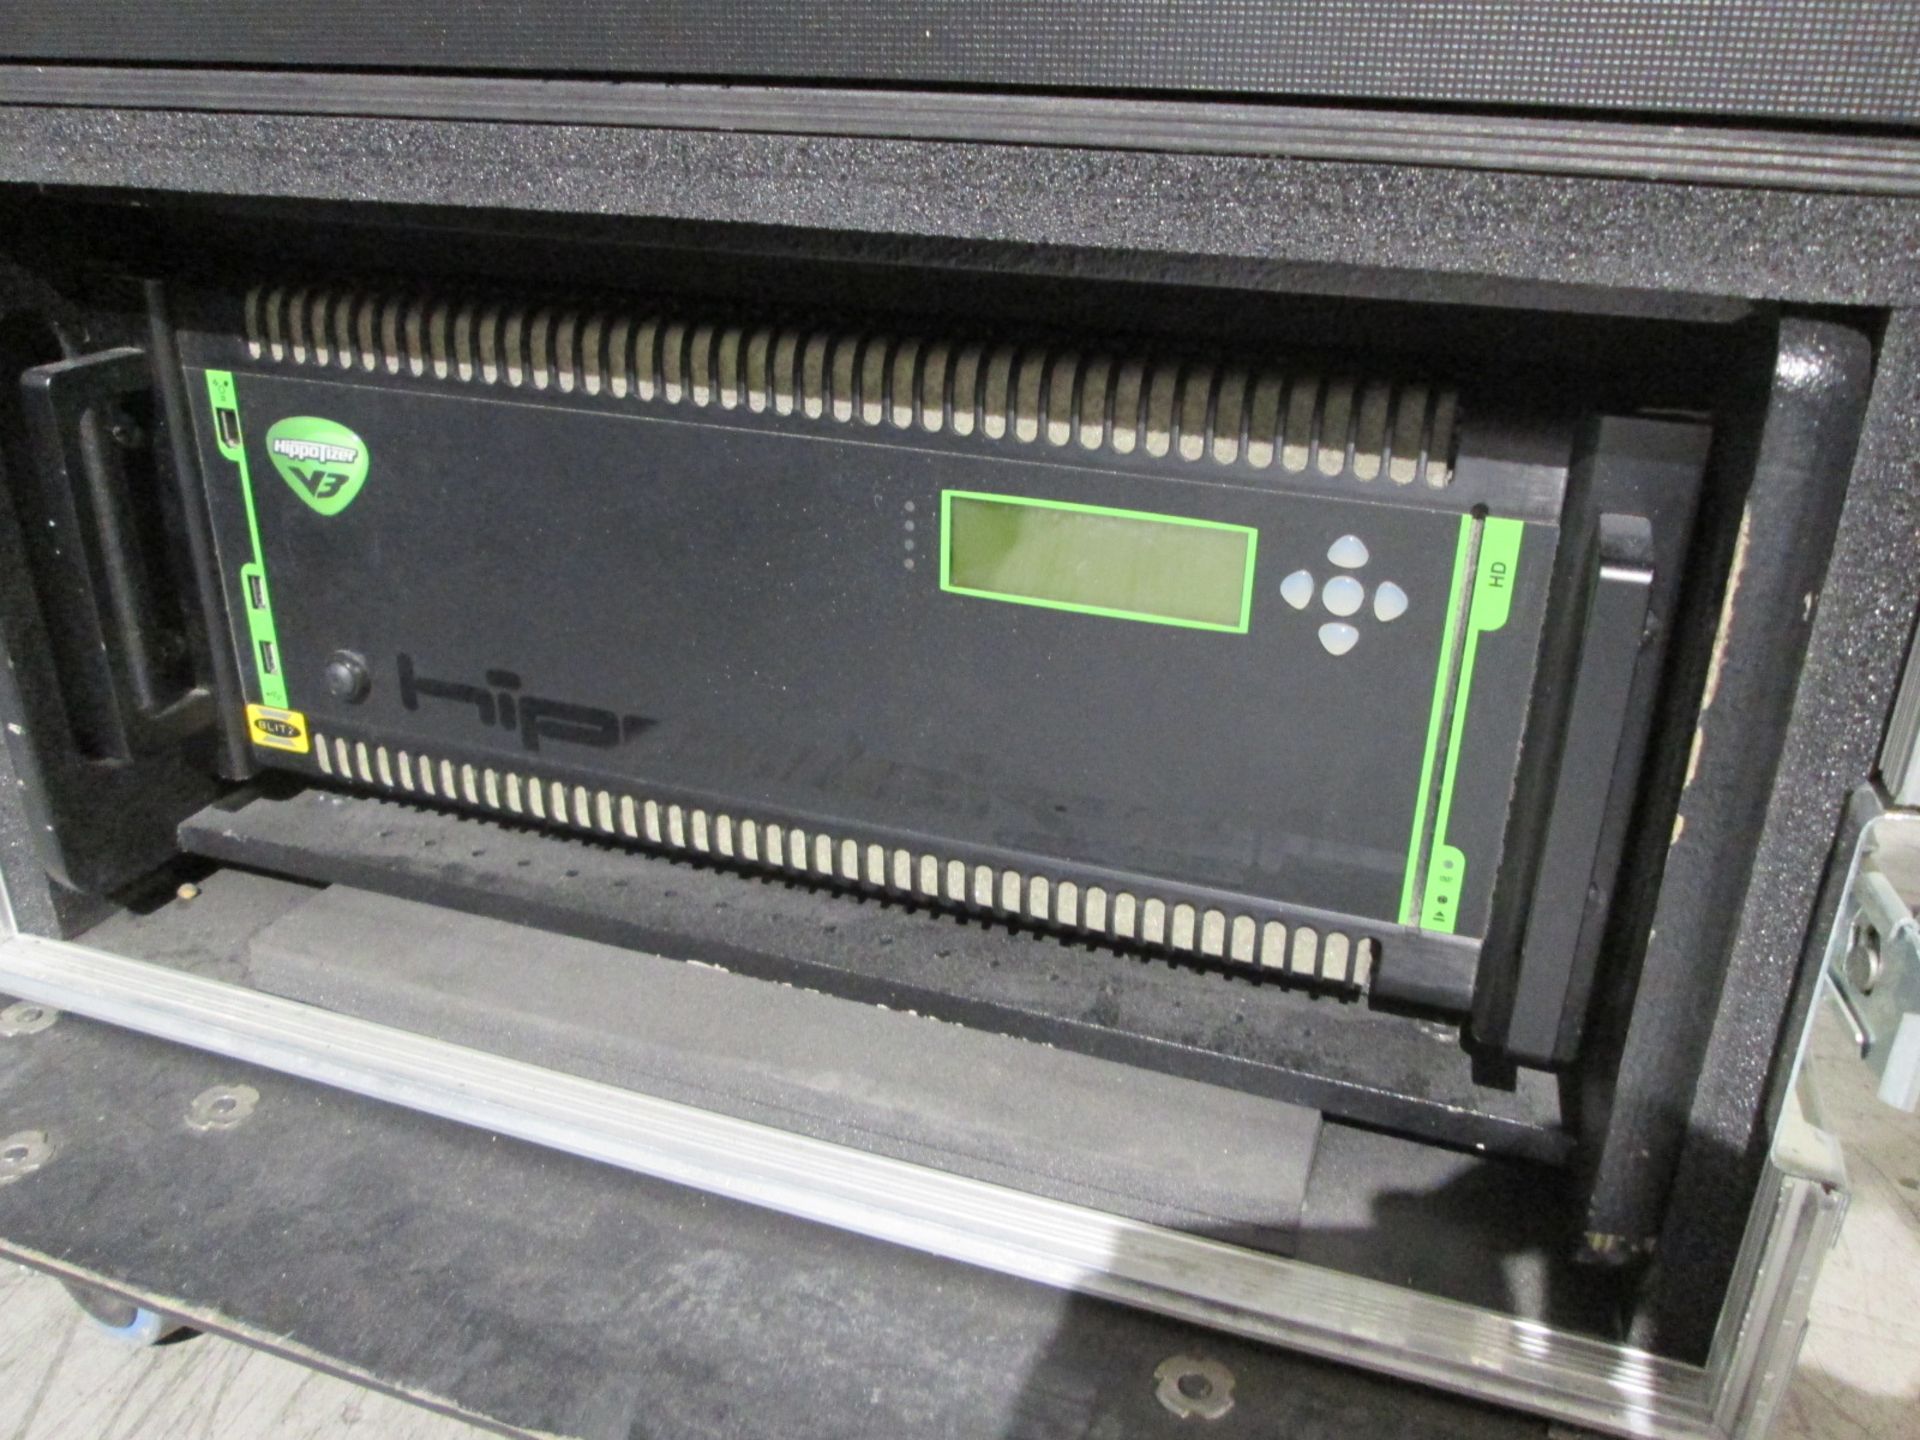 Green Hippo V5 Hippotiser Media Graphics Server with fader remote panel. S/N 2200. In flight case - Image 2 of 9